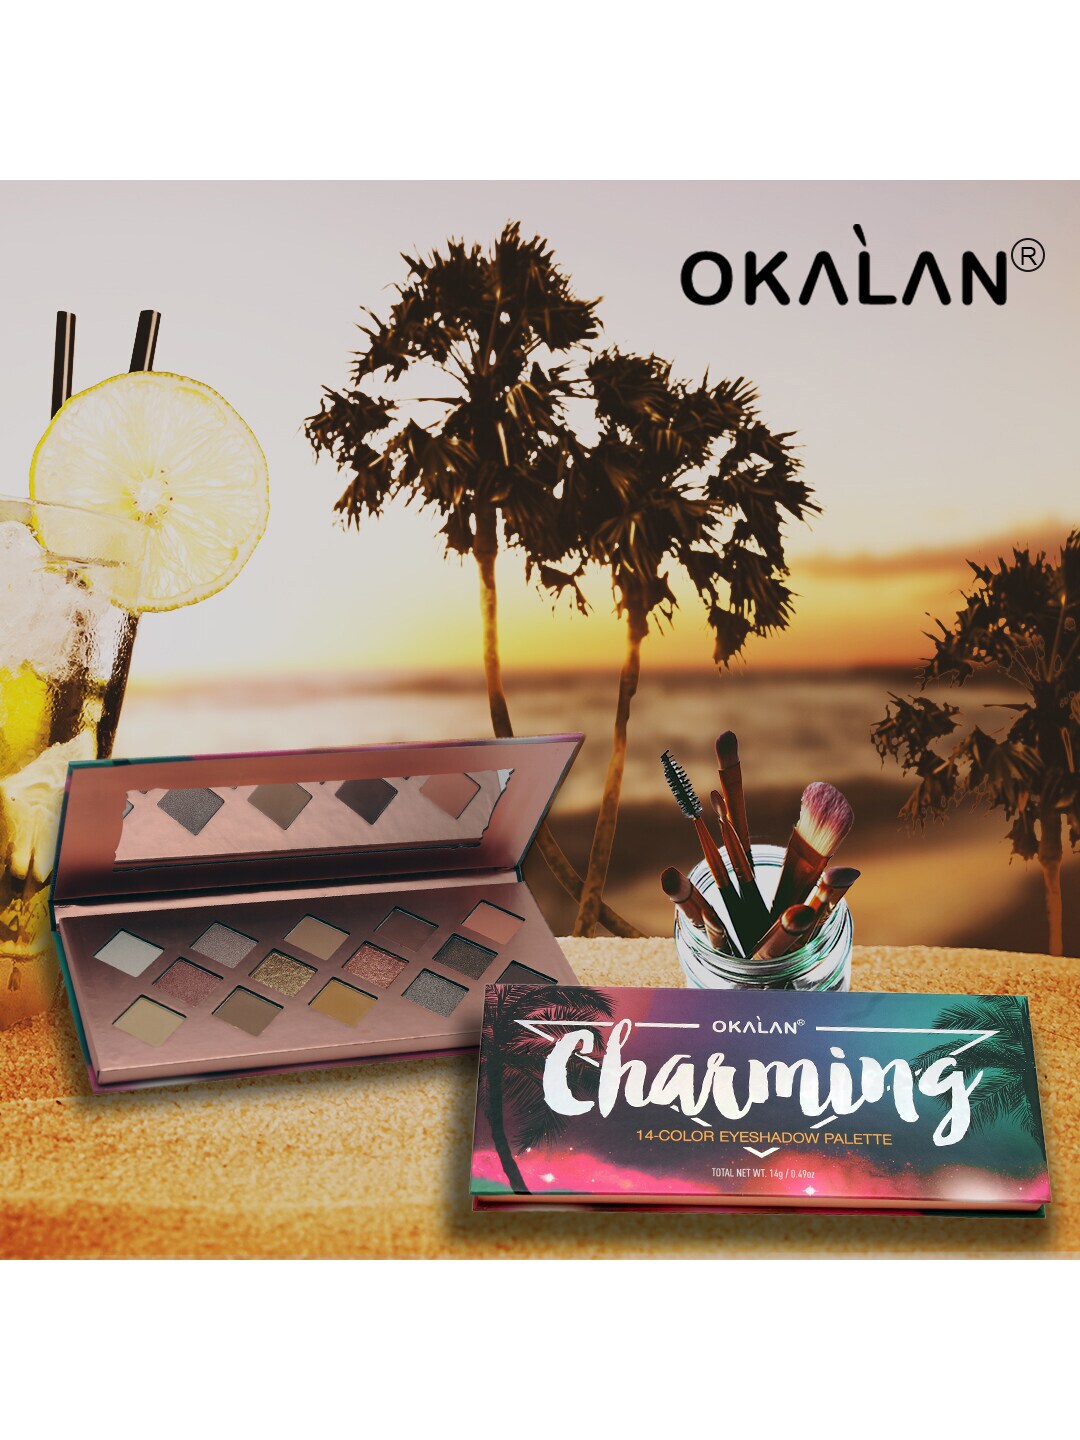 OKALAN 14 Color Eyeshadow Palette- Charming Price in India